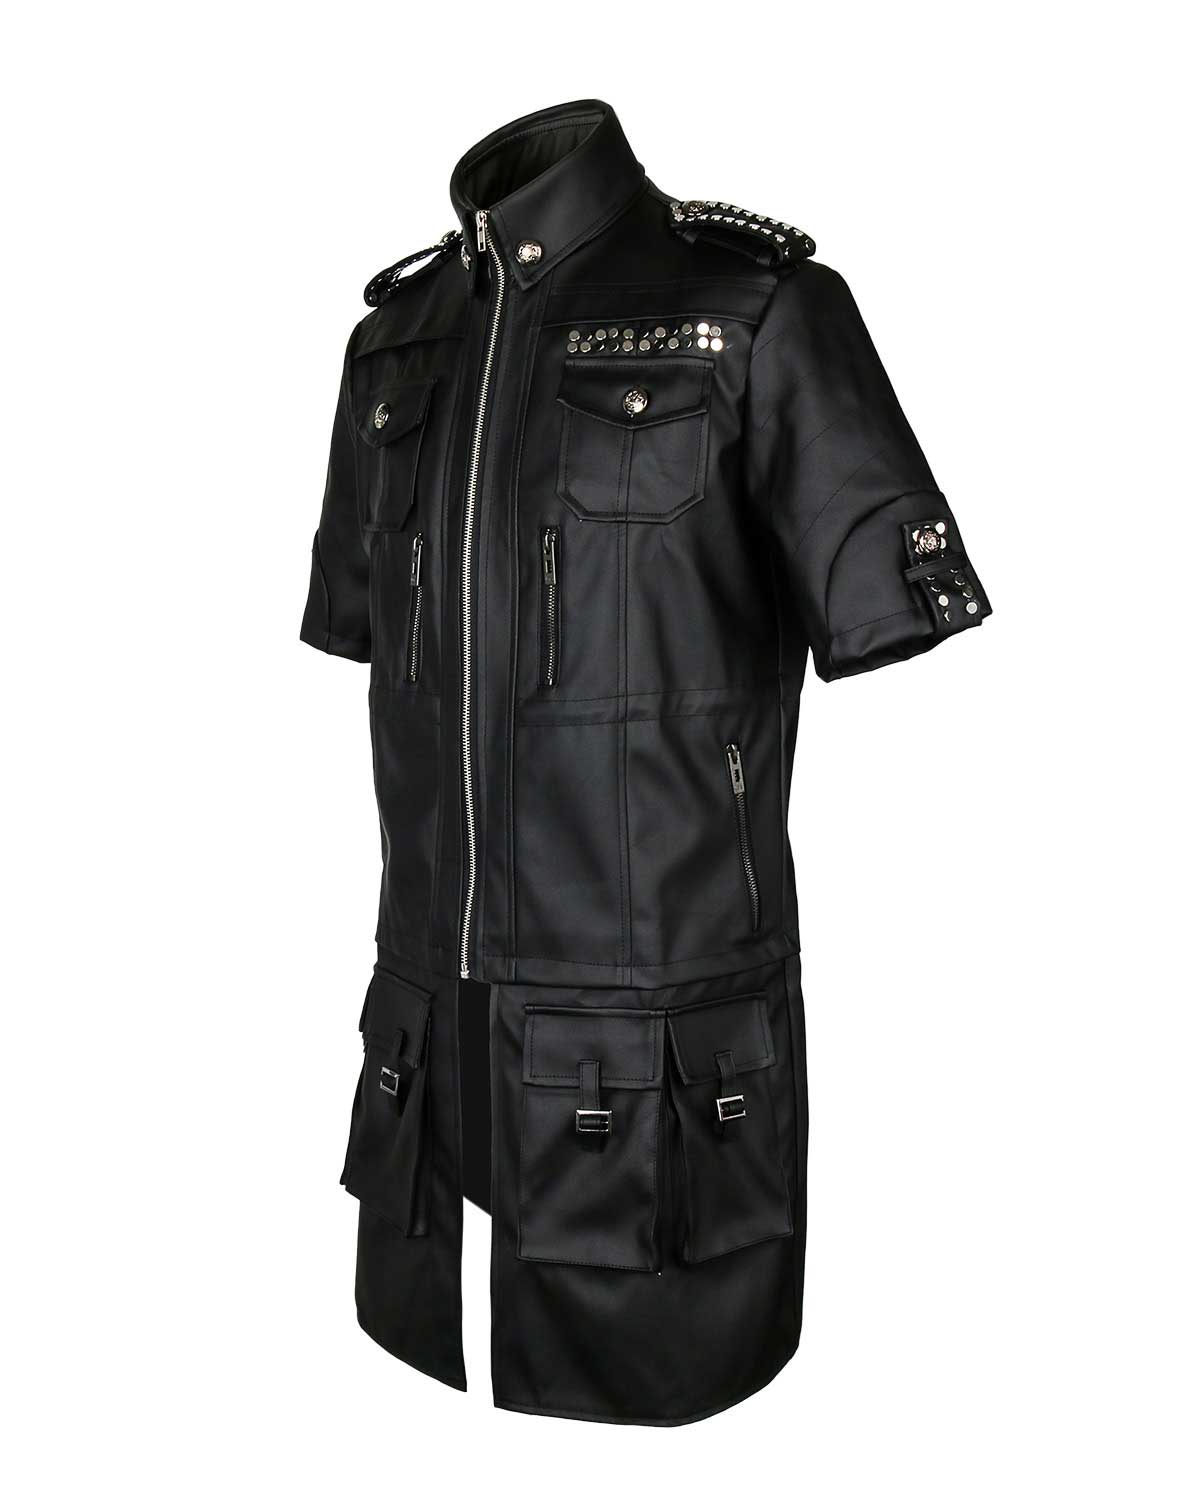 Noctis Lucis Caelum Final Fantasy XV Cosplay Costume Full Set Outfits